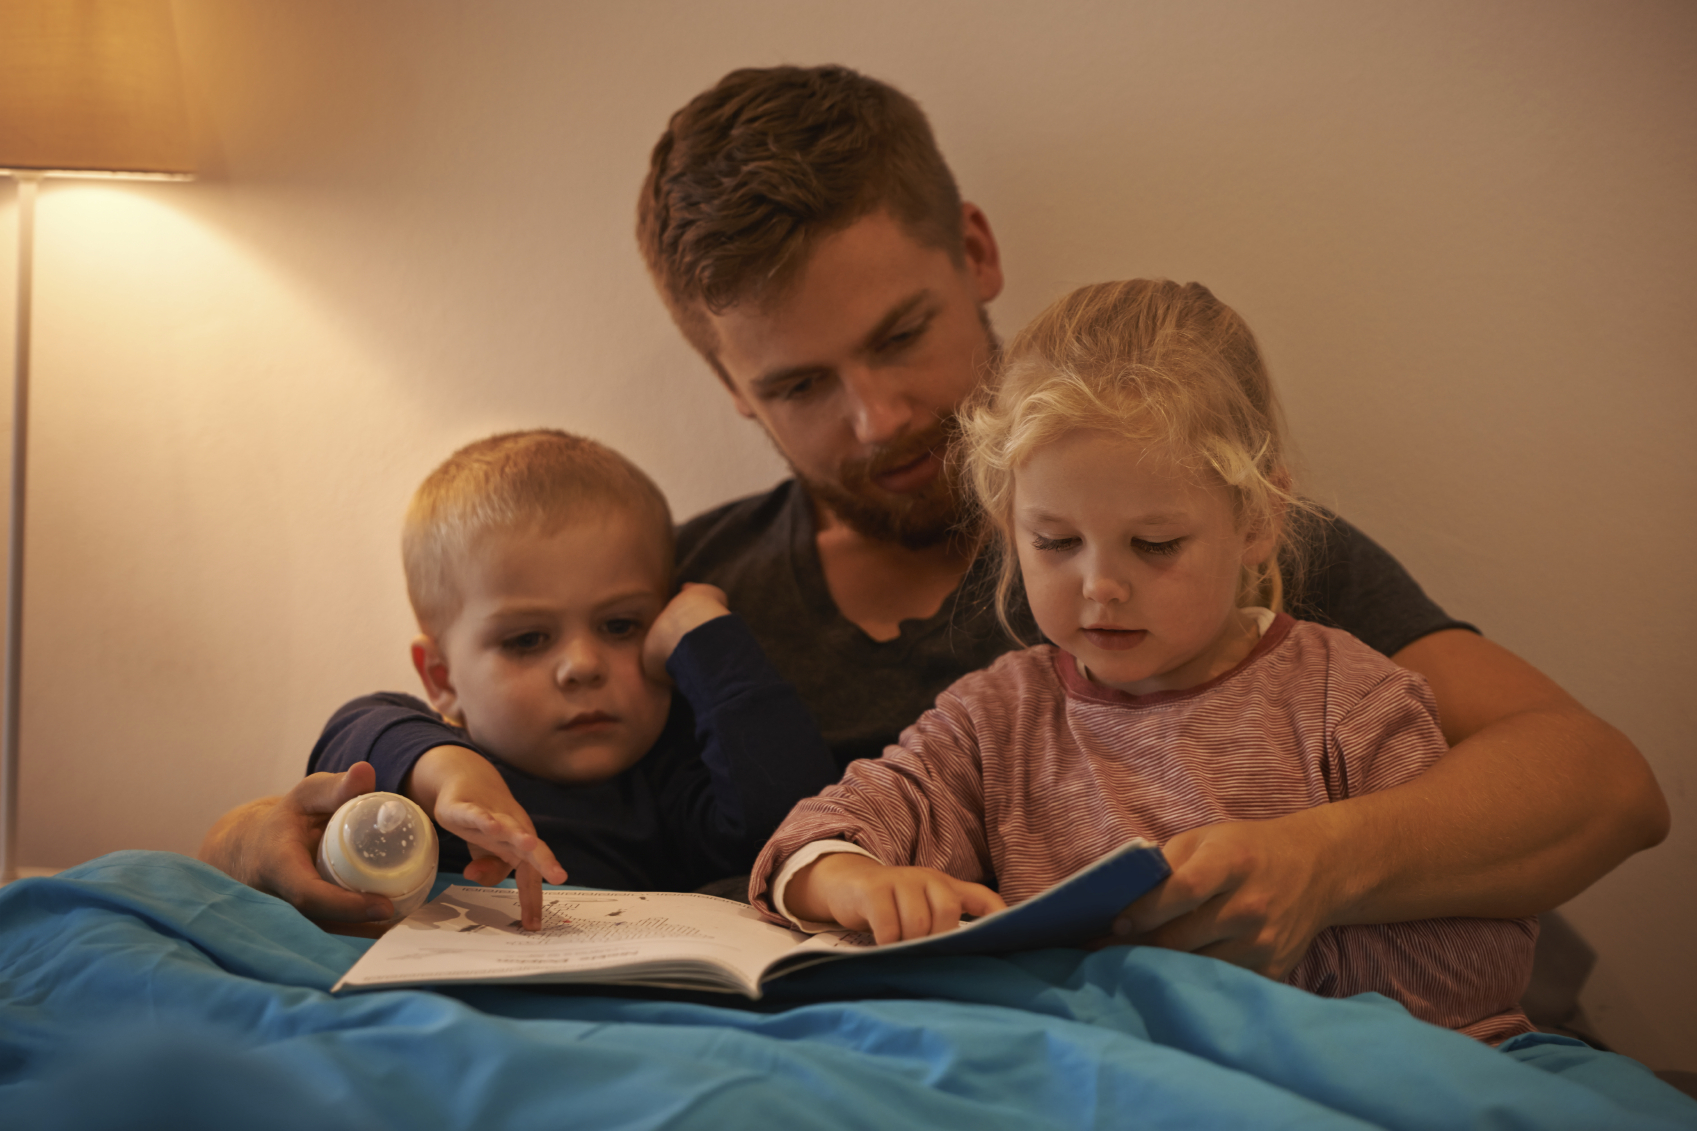 Incorporating Bedtime Stories Is A Great Part Of A Sleep Routine